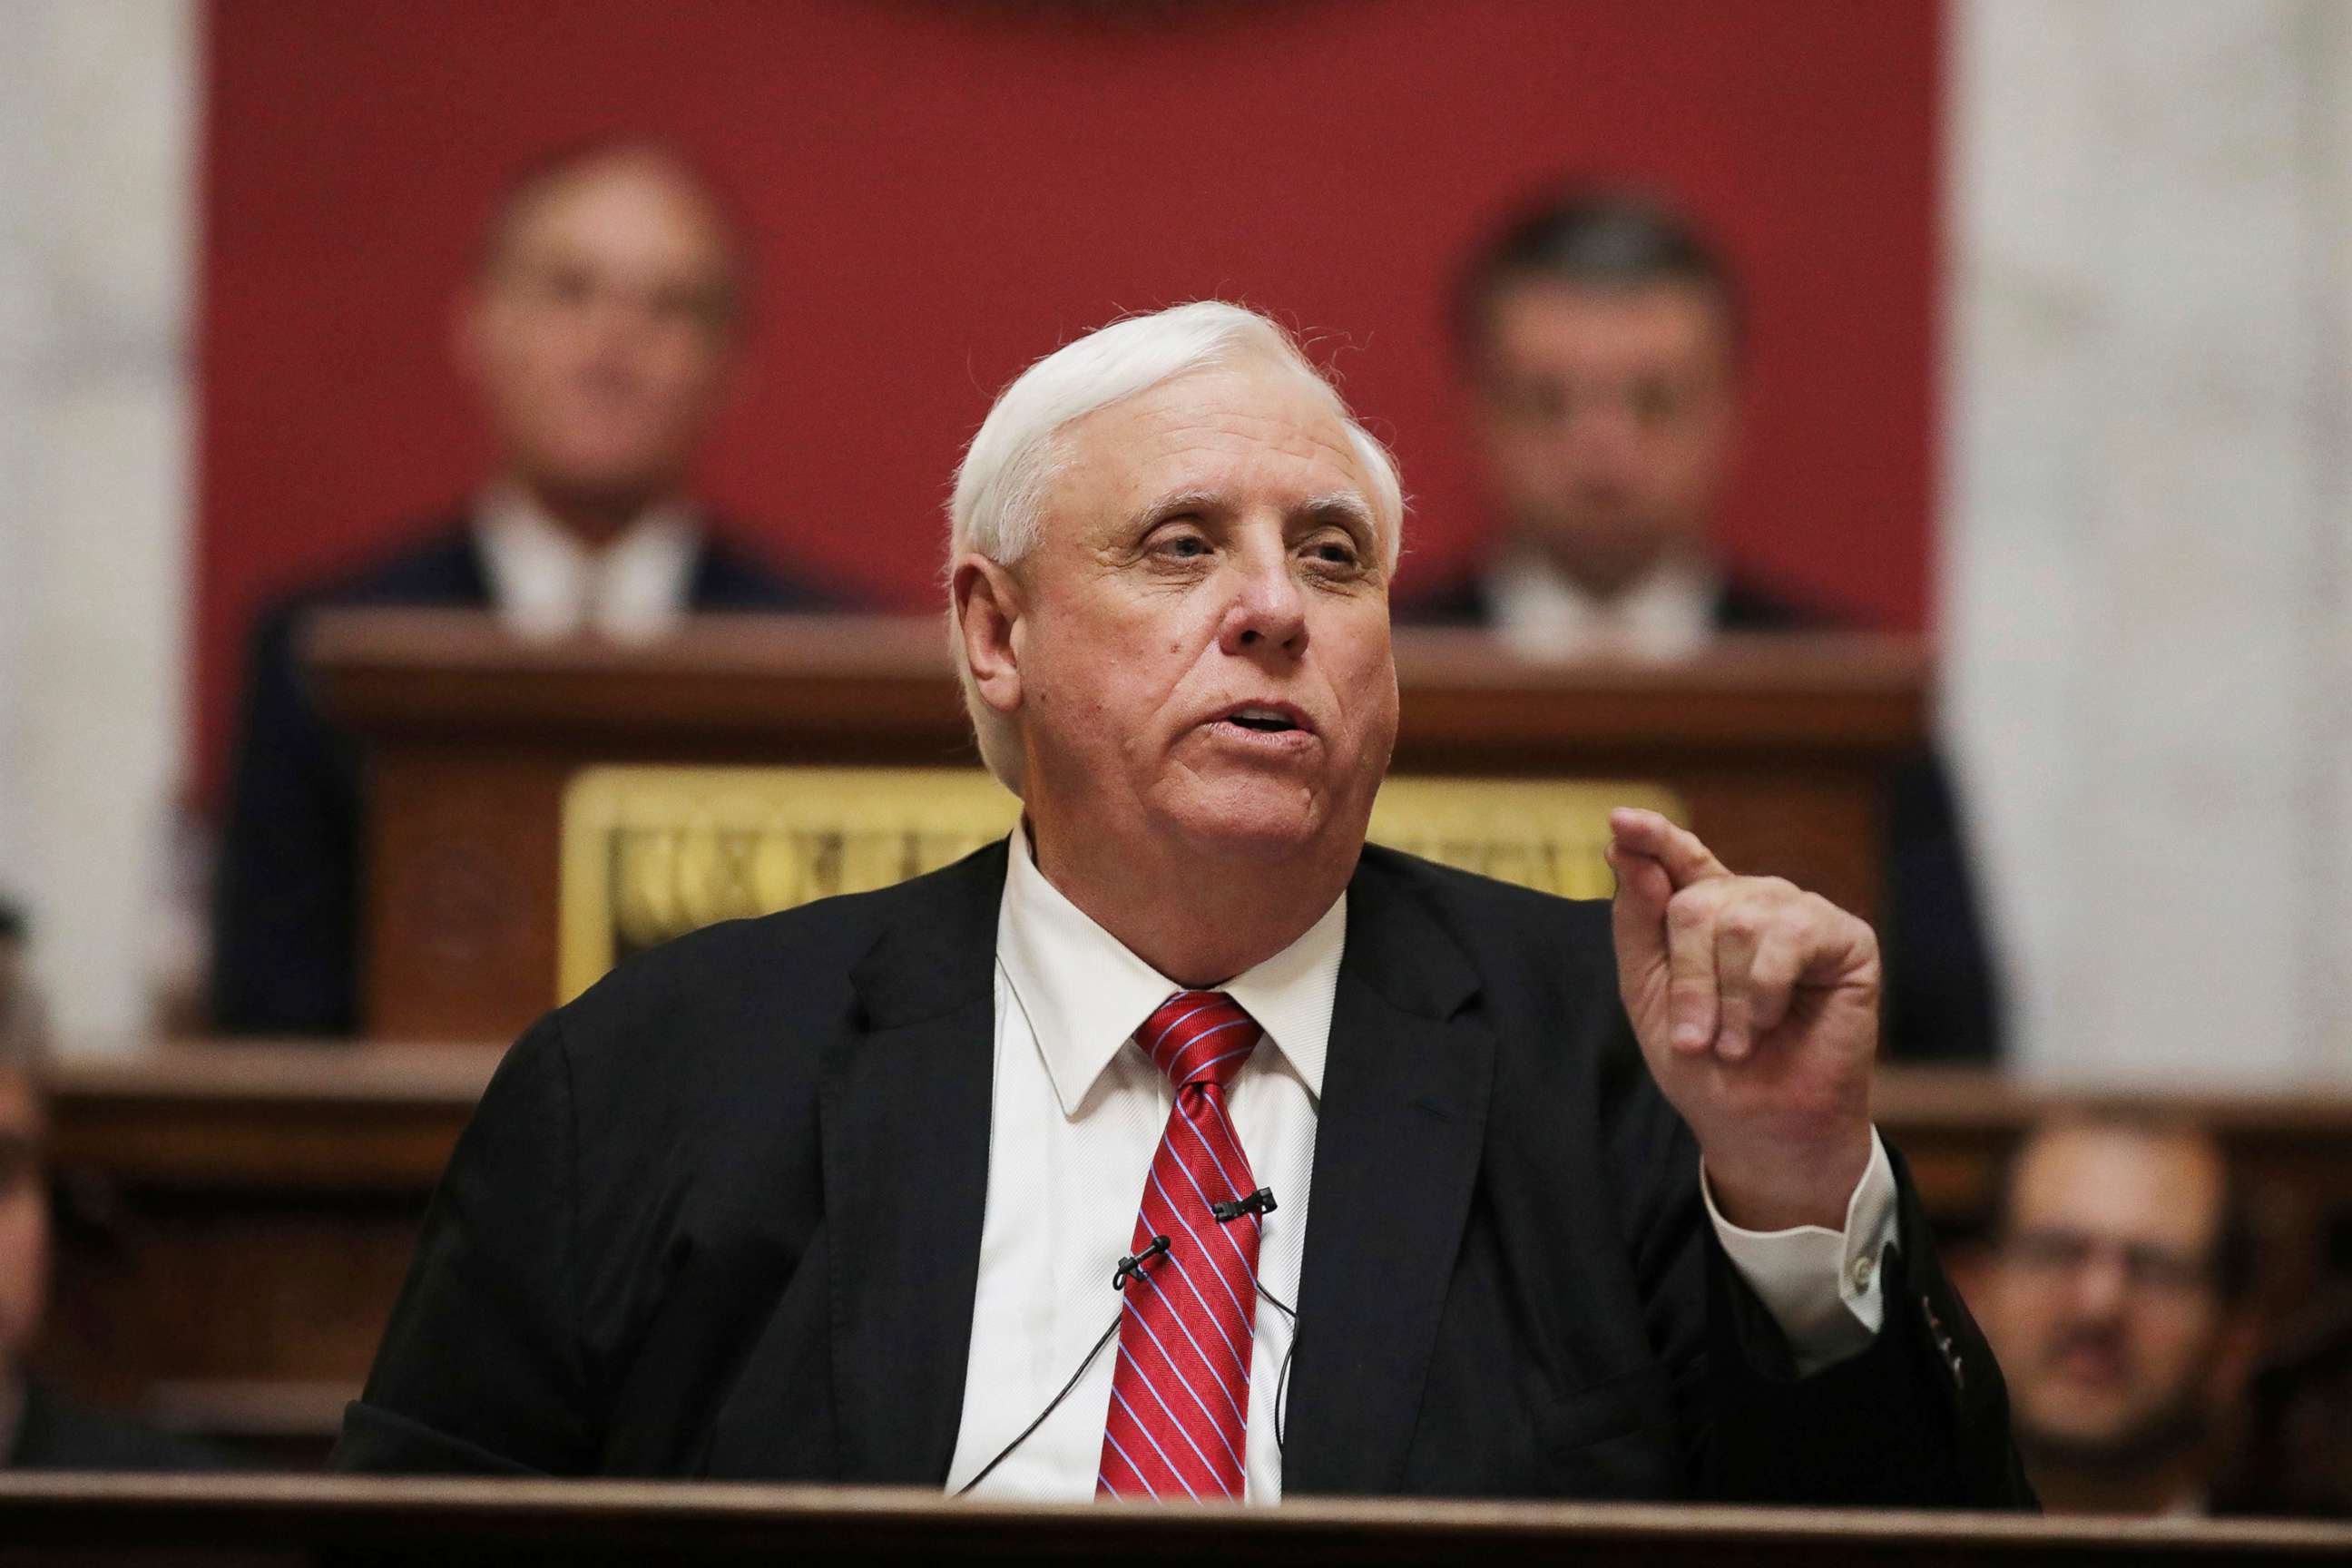 PHOTO: In this Jan. 8, 2020 file photo West Virginia Governor Jim Justice delivers his annual State of the State address in the House Chambers at the state capitol, in Charleston, W.Va.